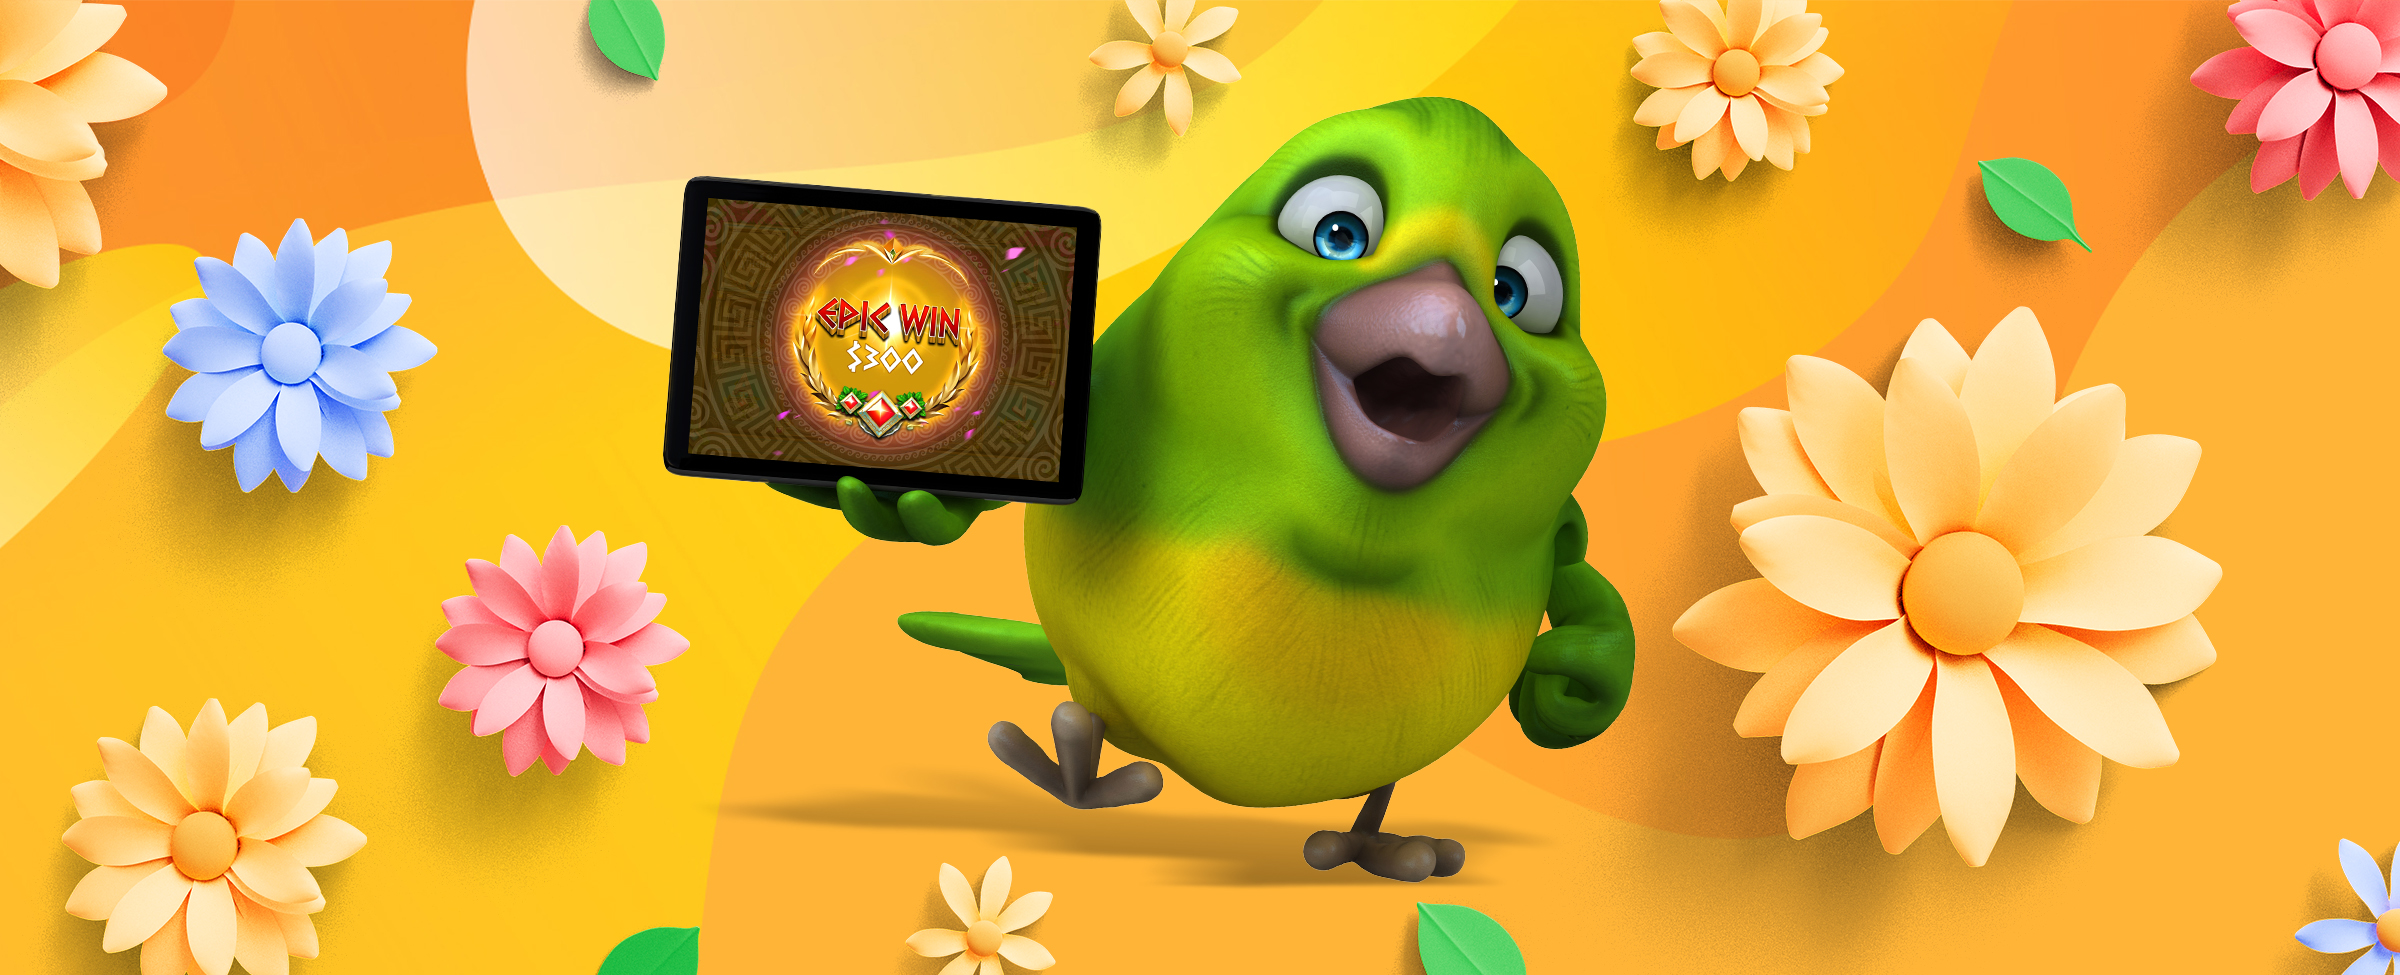 A green 3D-animated bird holds up an iPad one hand, showing a winning screen from a SlotsLV slot game. Surrounding the bird are a variety of mono-tone sunflowers in pink, apricot, and light blue.